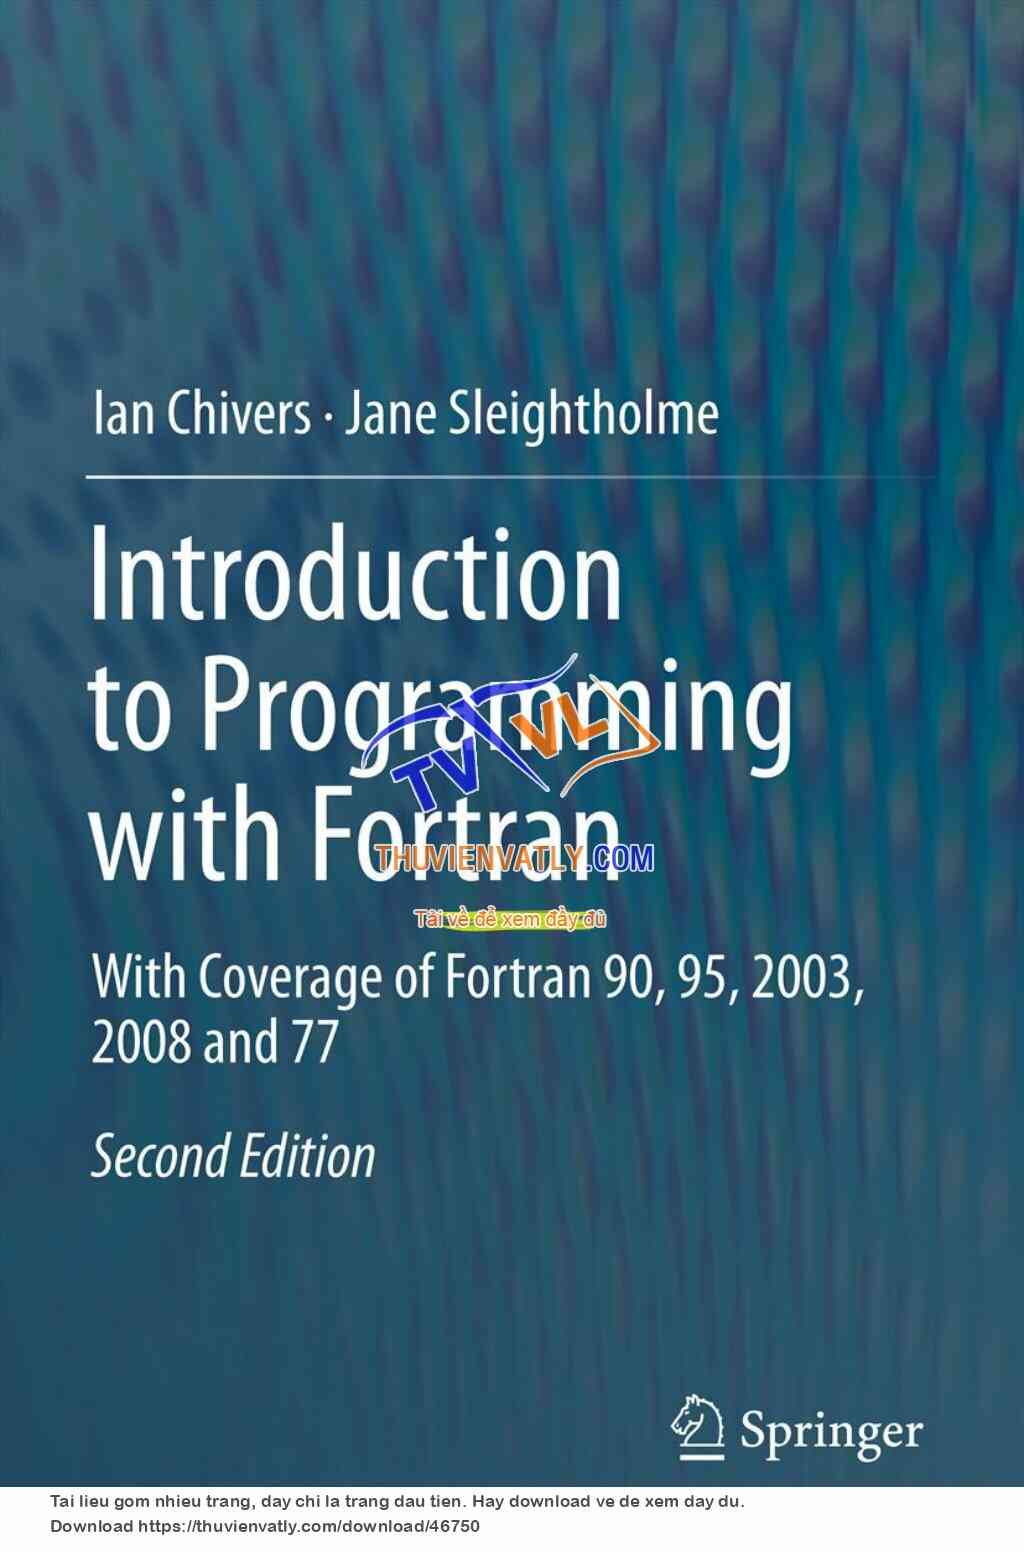 Introduction to Programming with Fortran